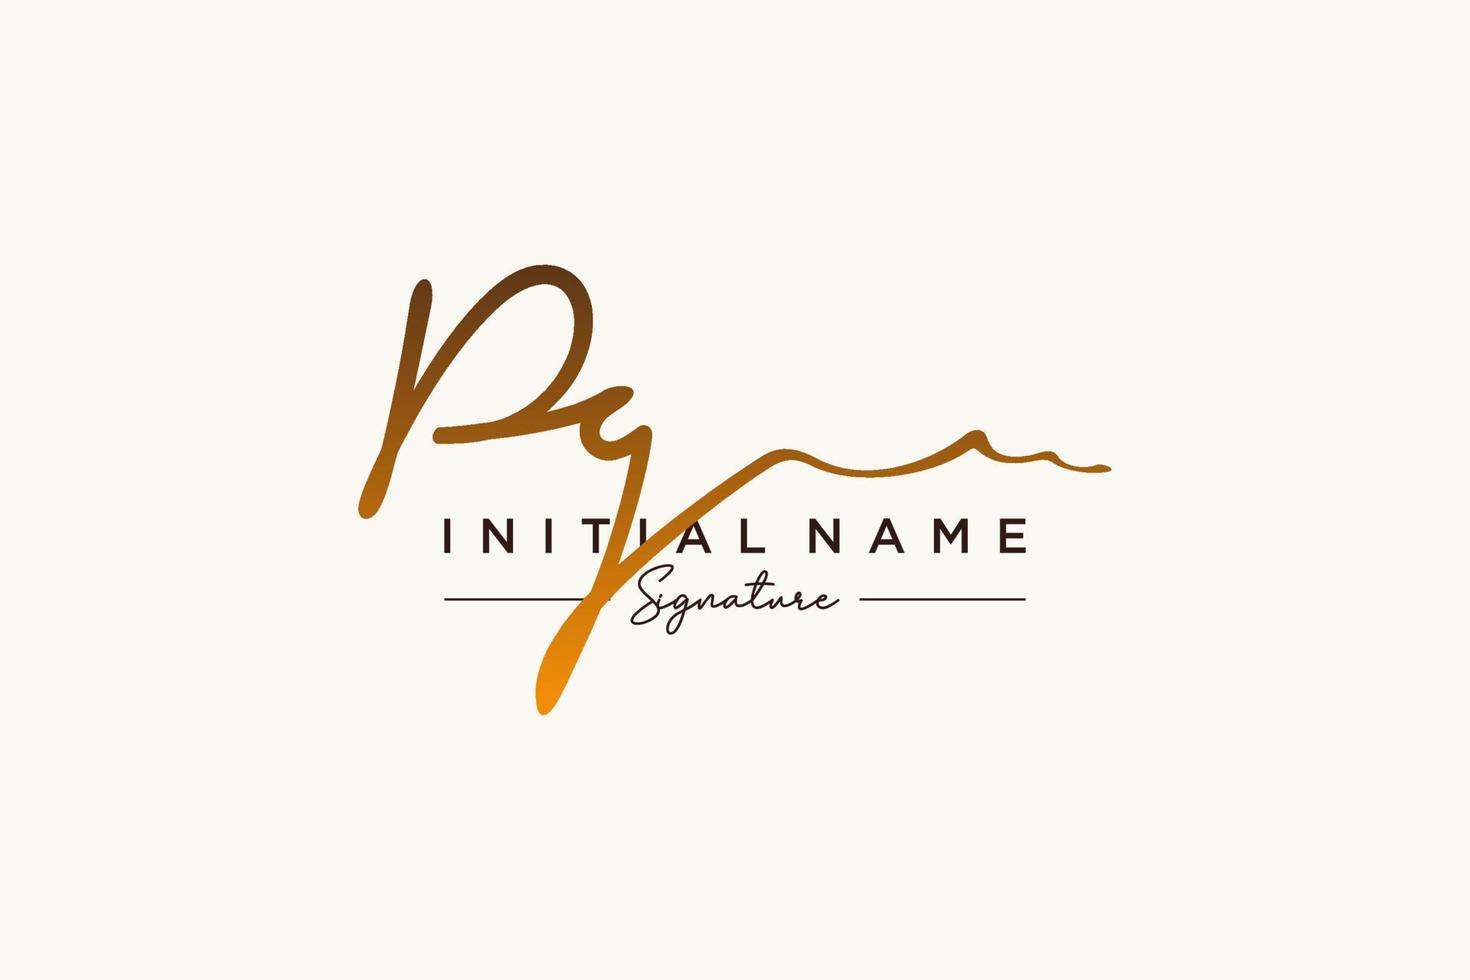 Initial PG signature logo template vector. Hand drawn Calligraphy lettering Vector illustration.